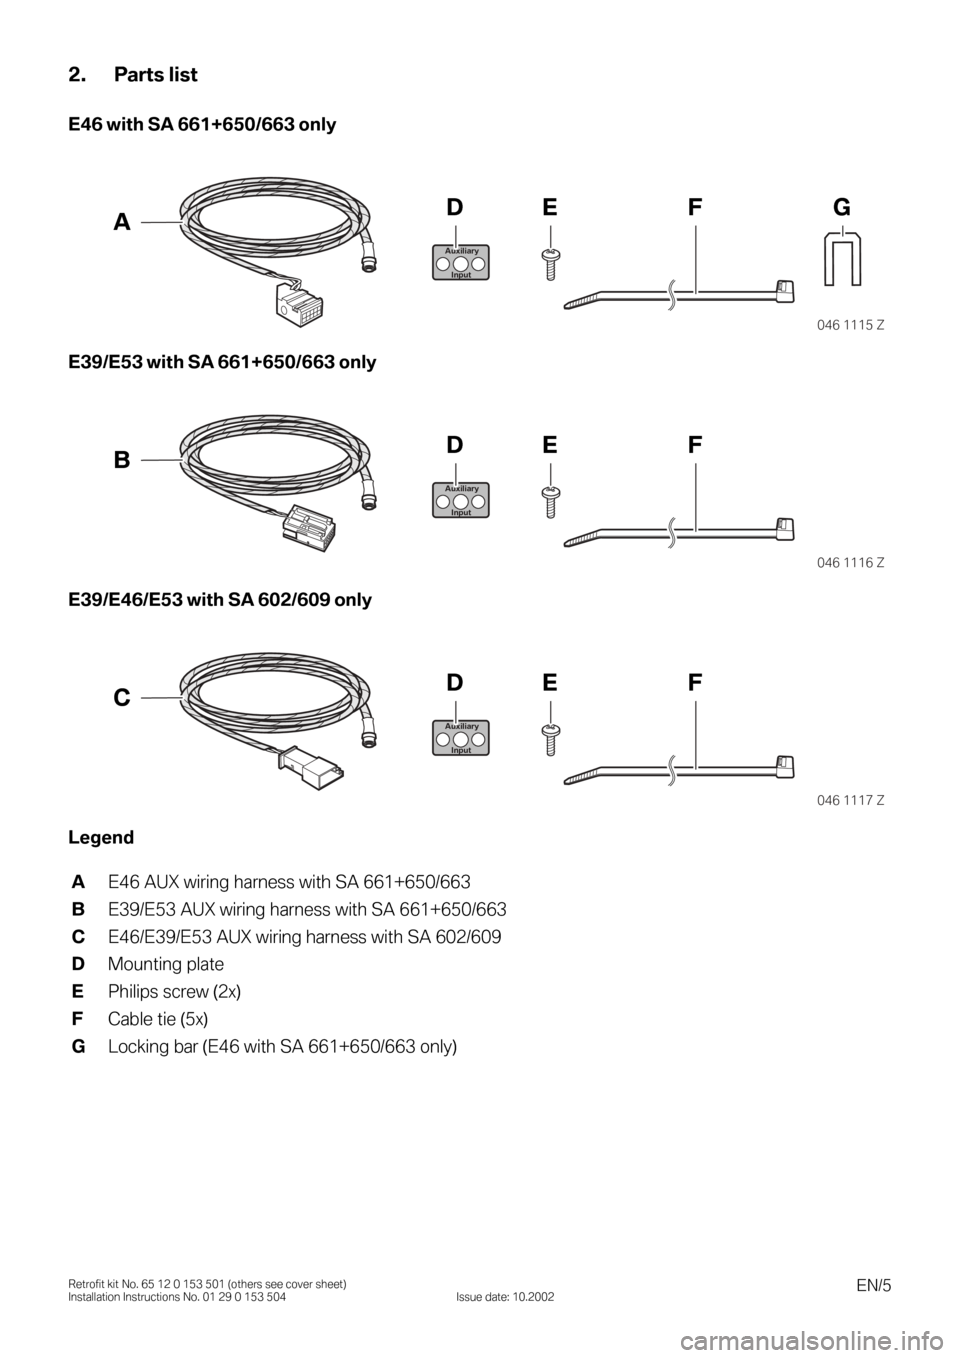 BMW X5 2004 E53 Auxilliary Connector Installation Instruction Manual EN/5Retrofit kit No. 65 12 0 153 501 (others see cover sheet)
Installation Instructions No. 01 29 0 153 504 Issue date: 10.2002
2. Parts list
E46 with SA 661+650/663 only
0
E39/E53 with SA 661+650/663